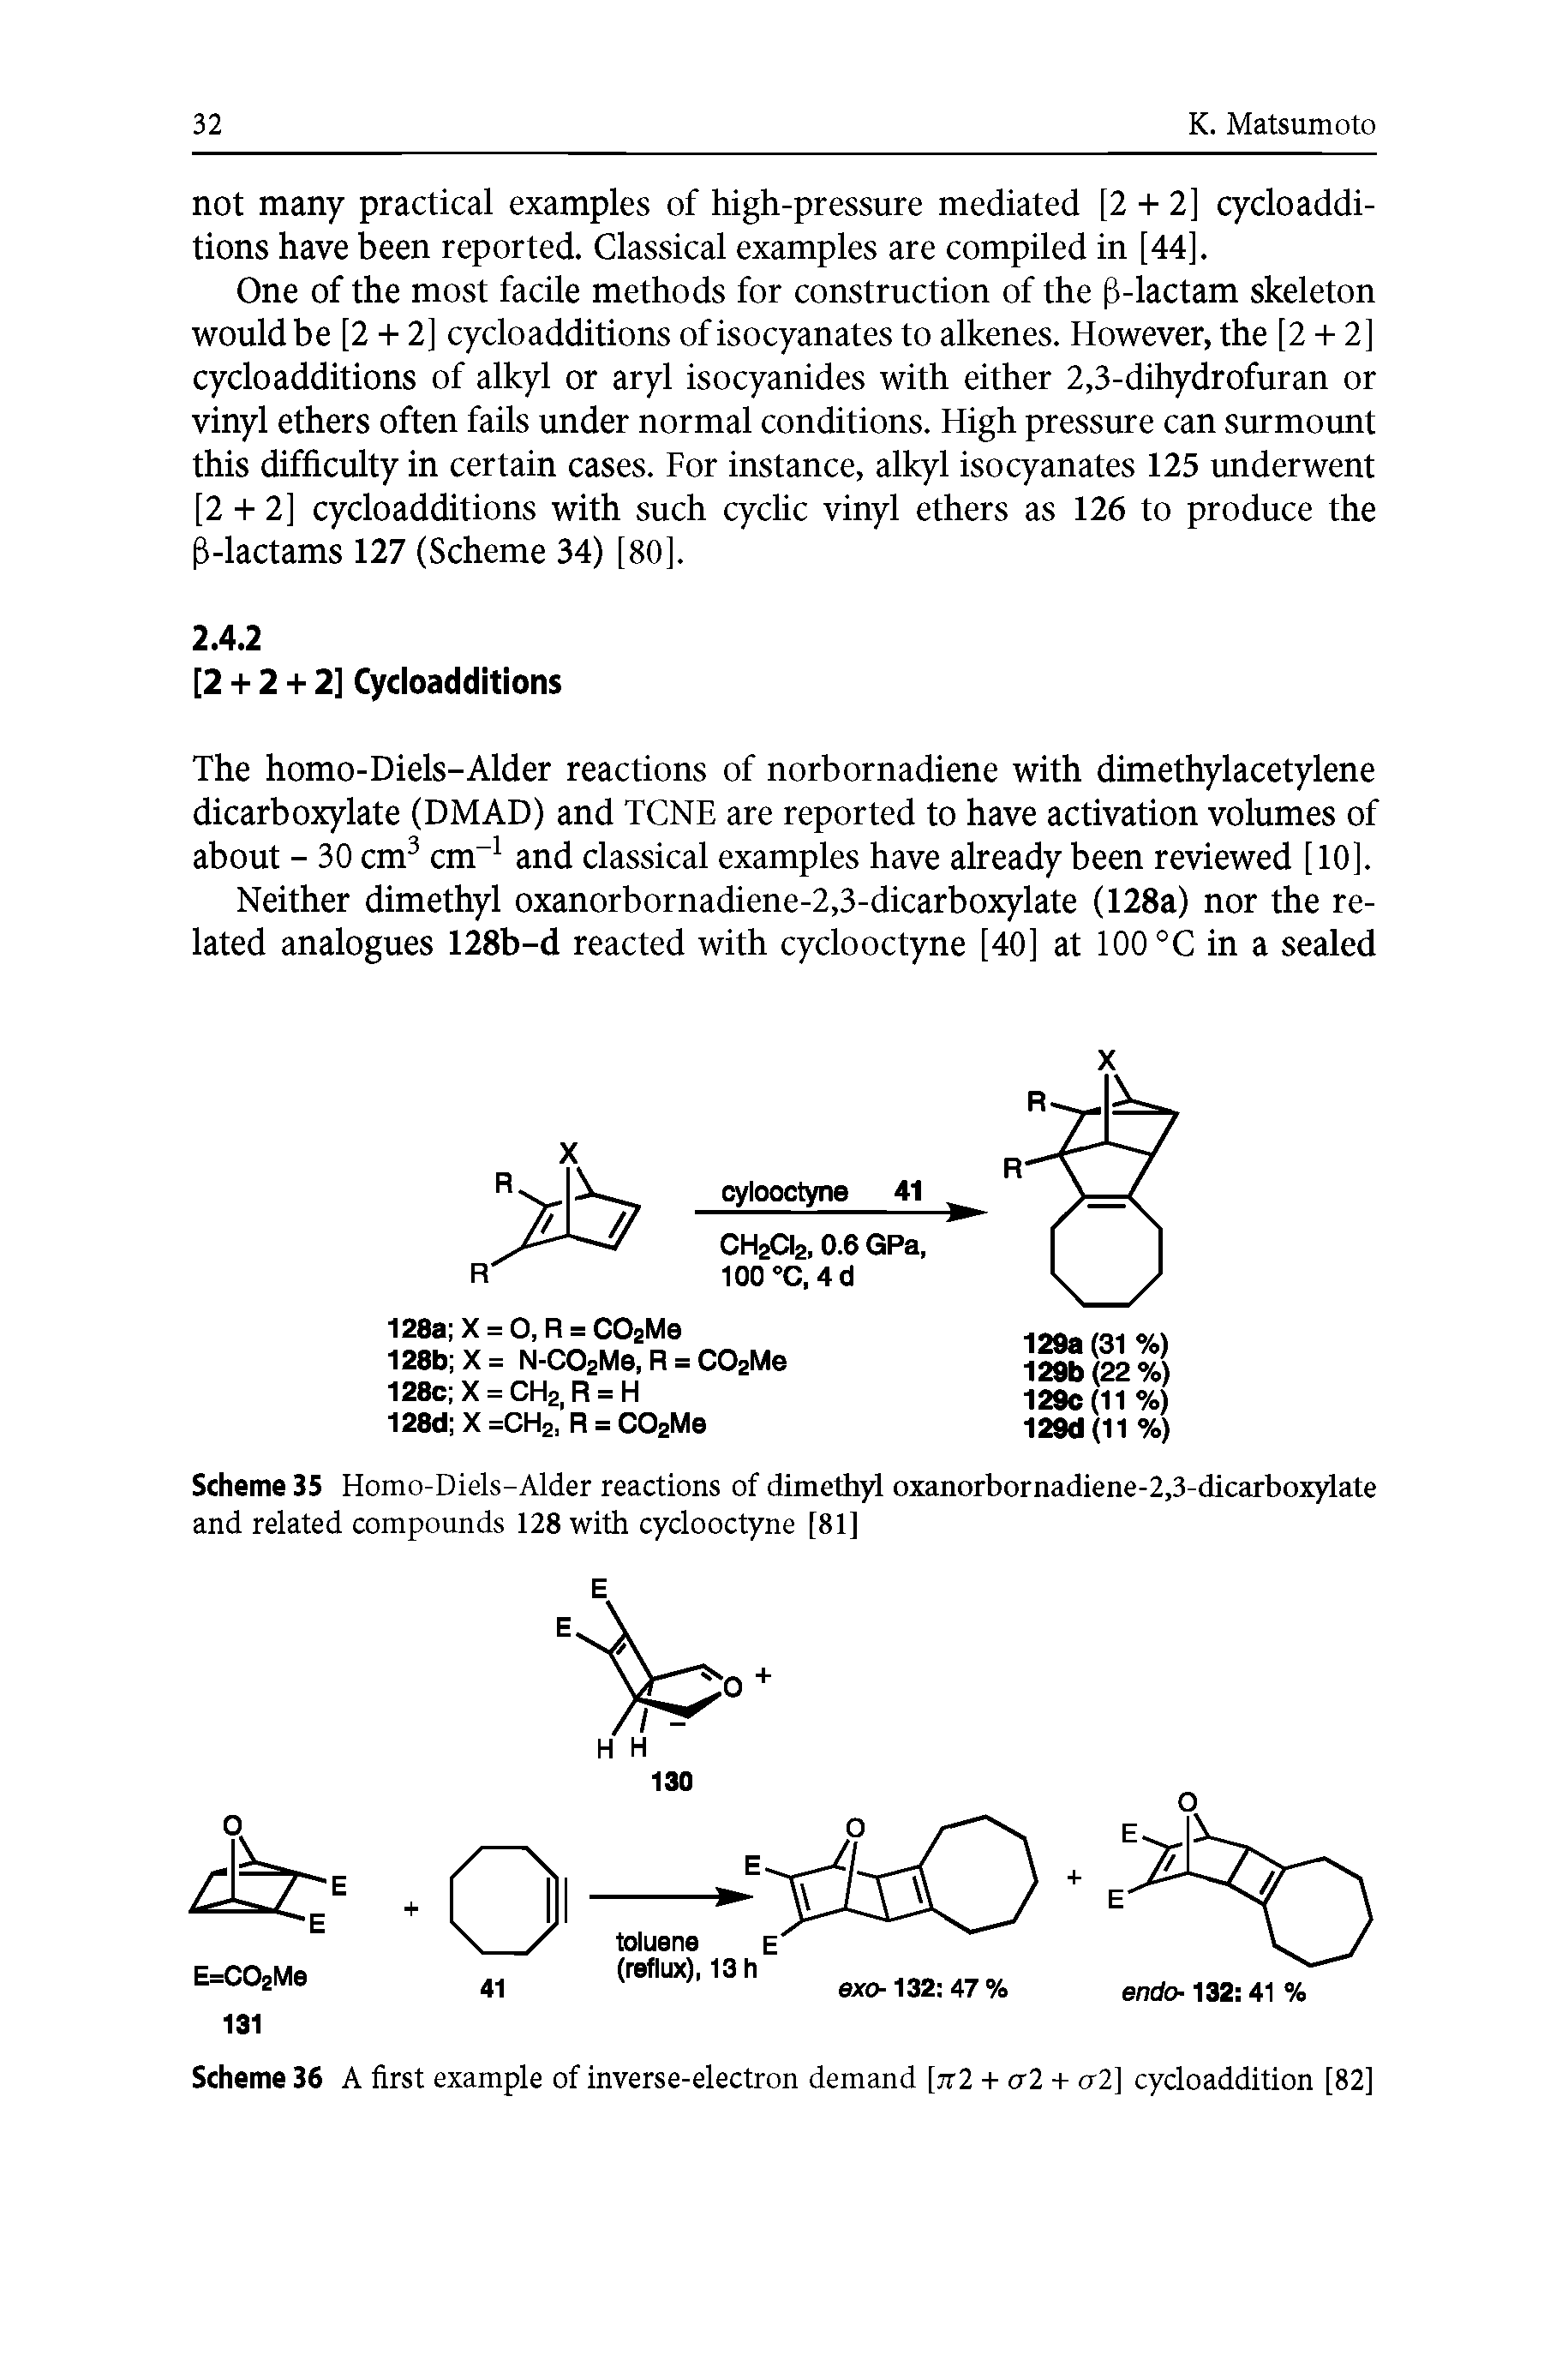 Scheme 35 Homo-Diels-Alder reactions of dimethyl oxanorbornadiene-2,3-dicarboxylate and related compounds 128 with cyclooctyne [81]...